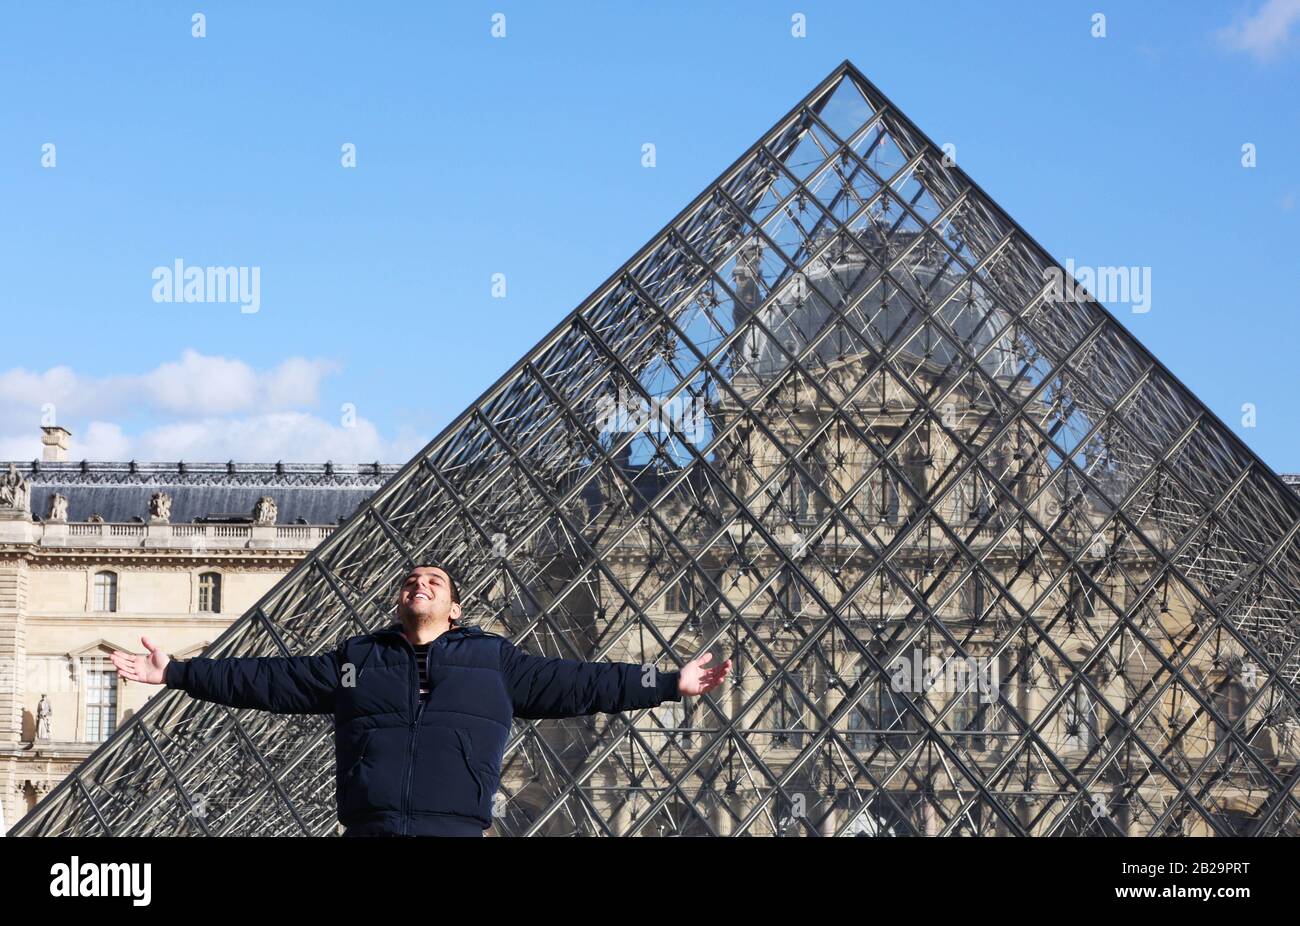 Paris. 11th Mar, 2019. File photo taken on March 11, 2019 shows a tourist posing for a photo in front of the Louvre Museum in Paris, France. The Louvre Museum was shut down on March 1 due to the spreading coronavirus epidemic. Credit: Gao Jing/Xinhua/Alamy Live News Stock Photo